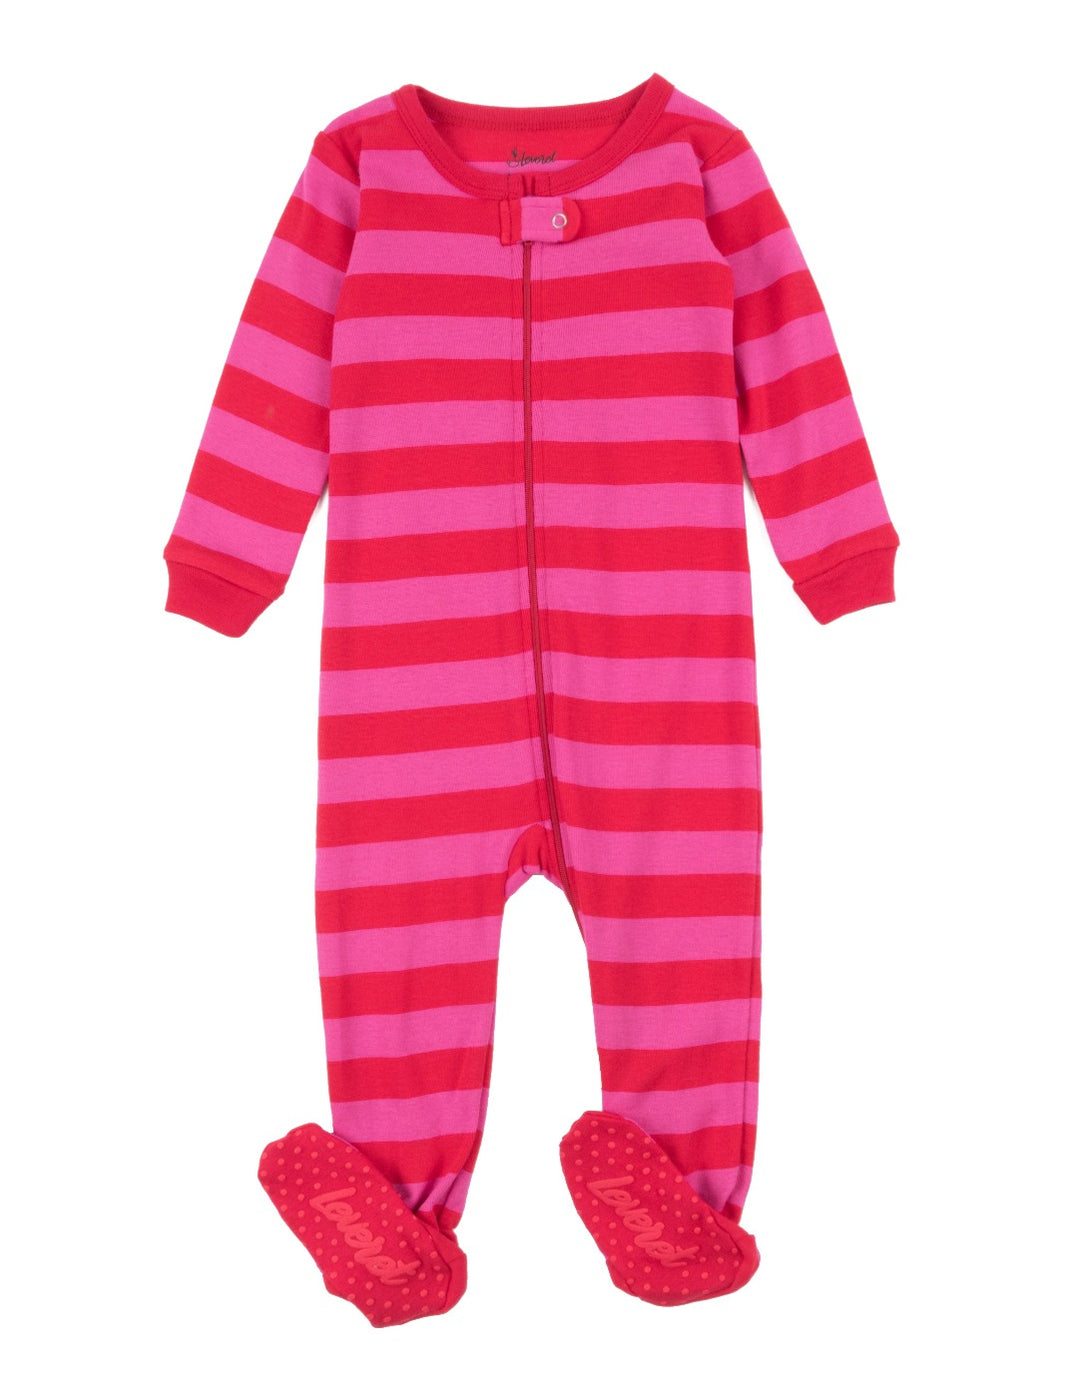 red and pink striped cotton baby footed pajama